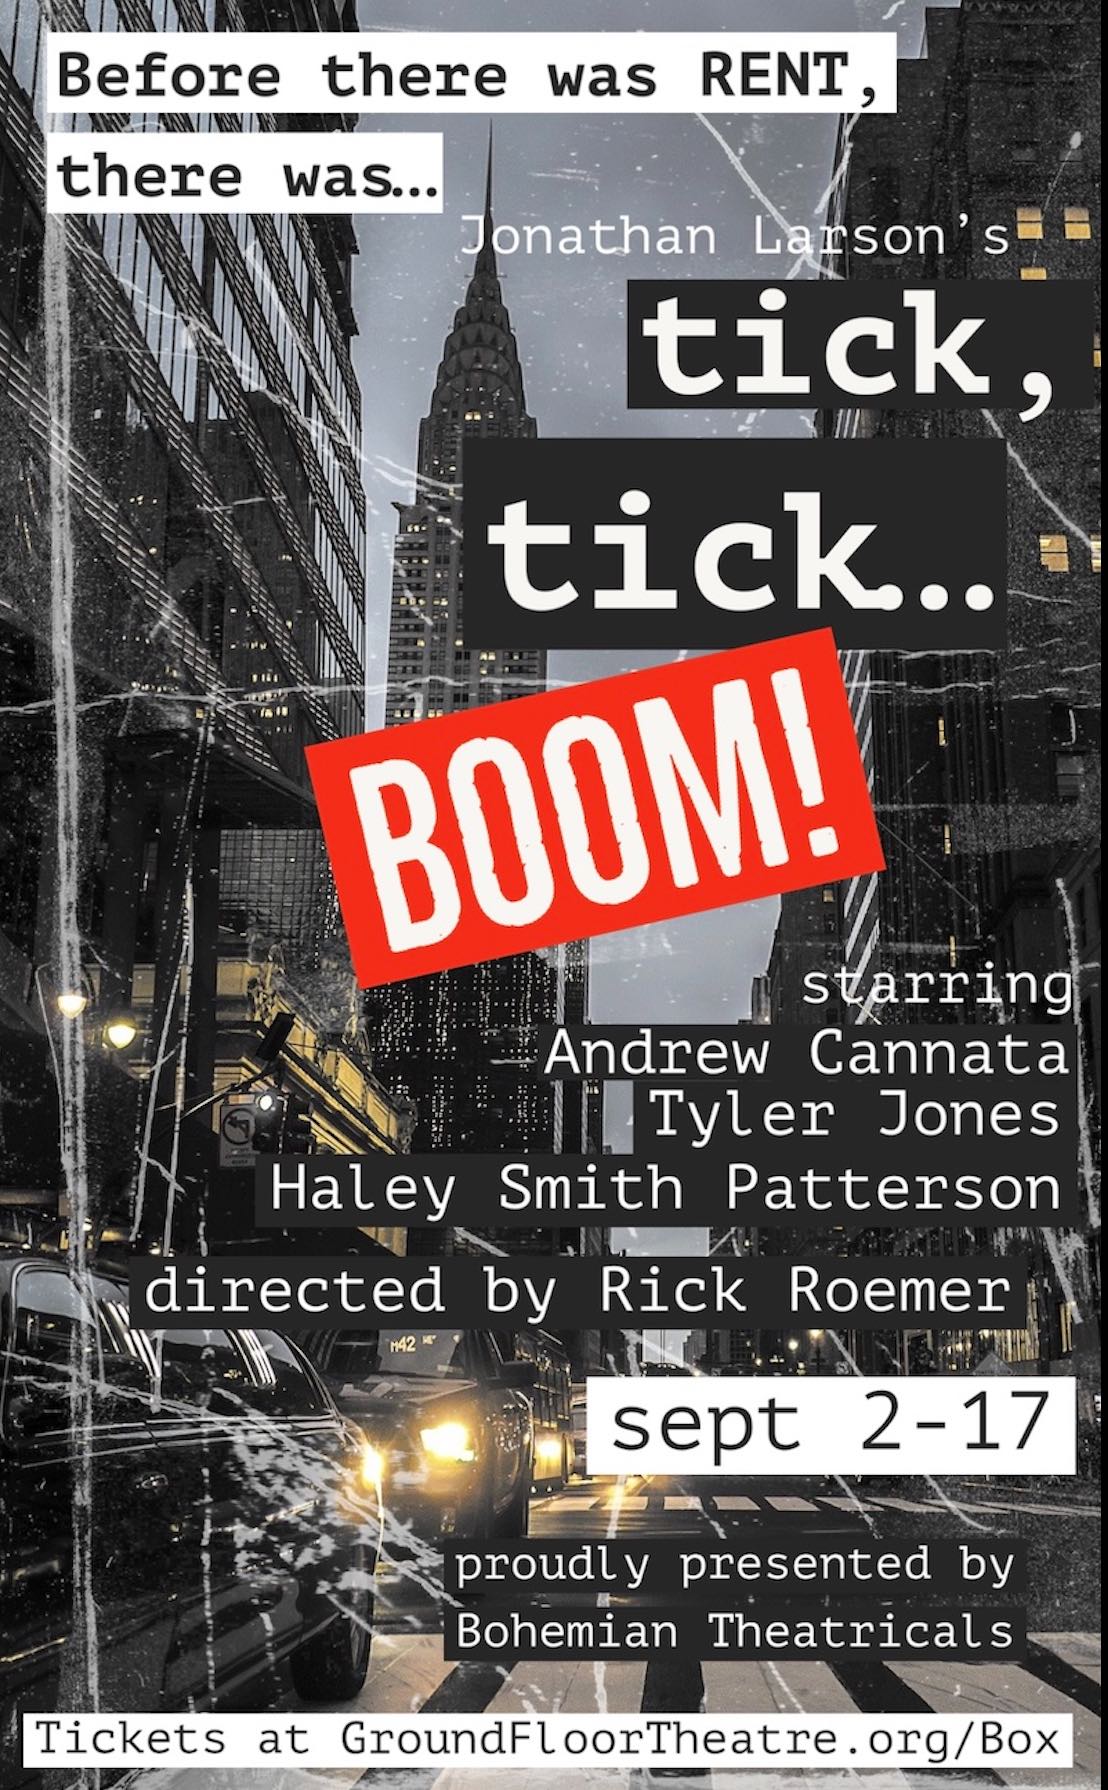 Tick, tick . . . BOOM! by Bohemian Theatricals